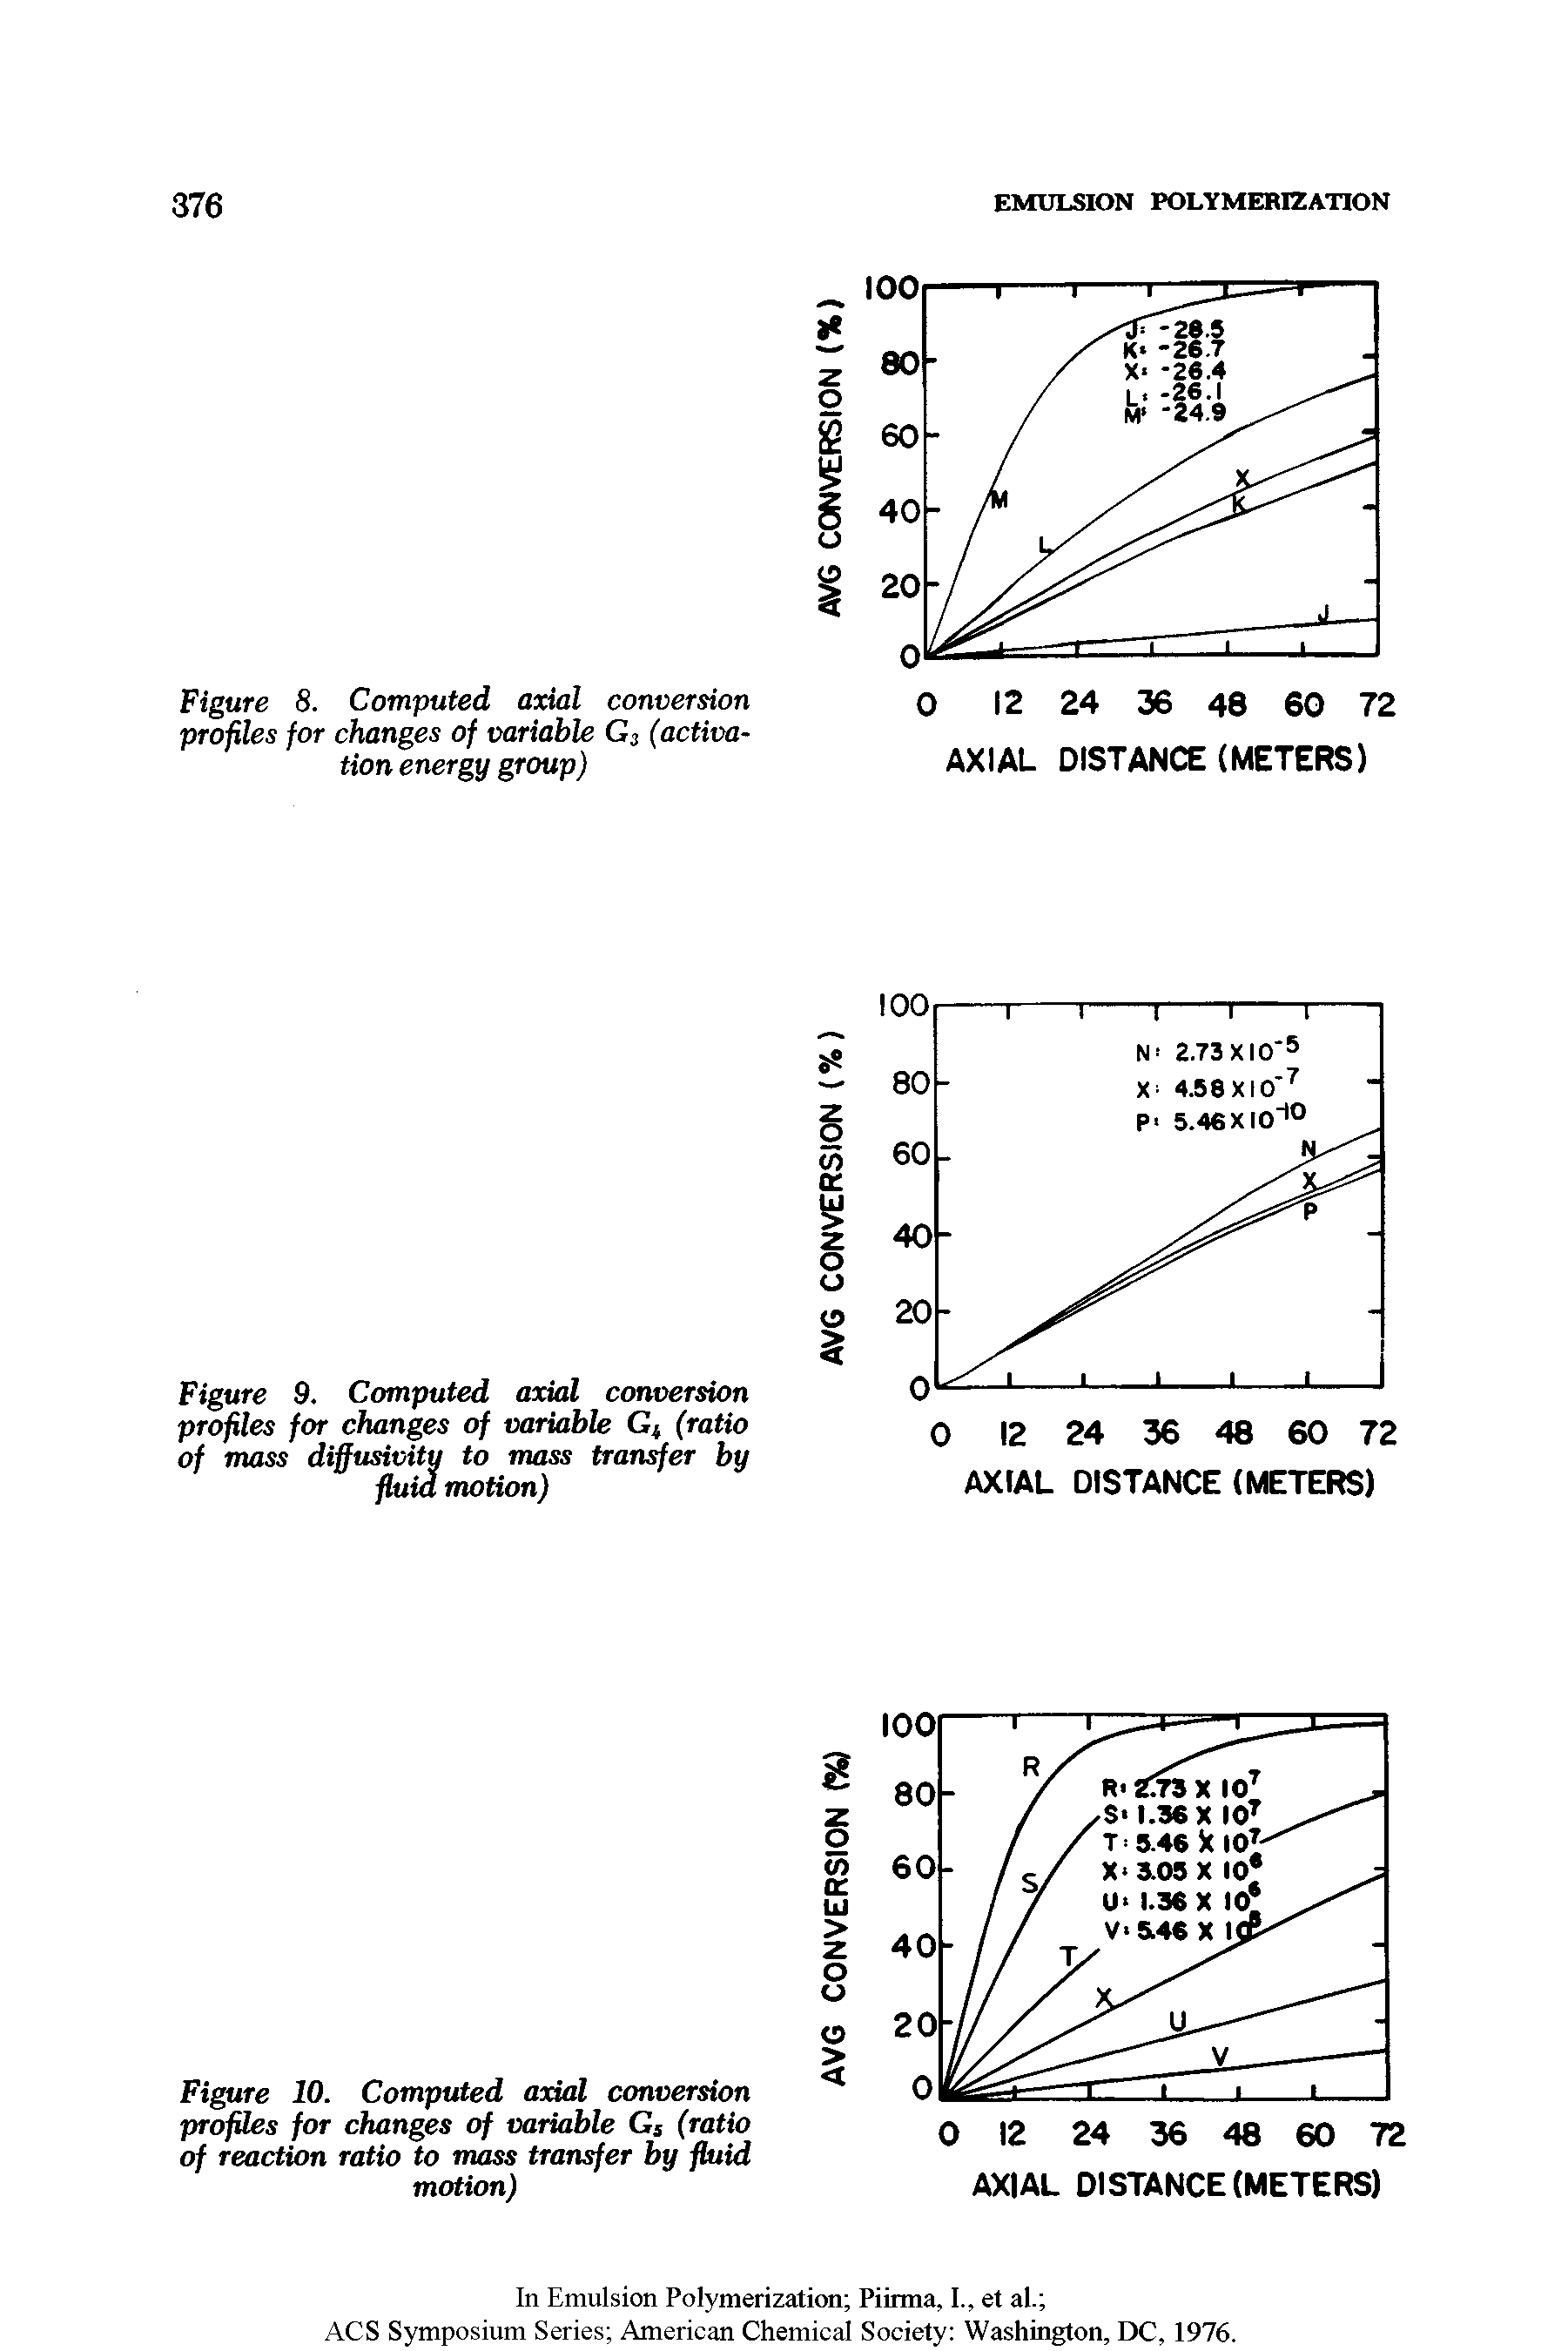 Figure 8. Computed axial conversion profiles for changes of variable G3 (activation energy group)...